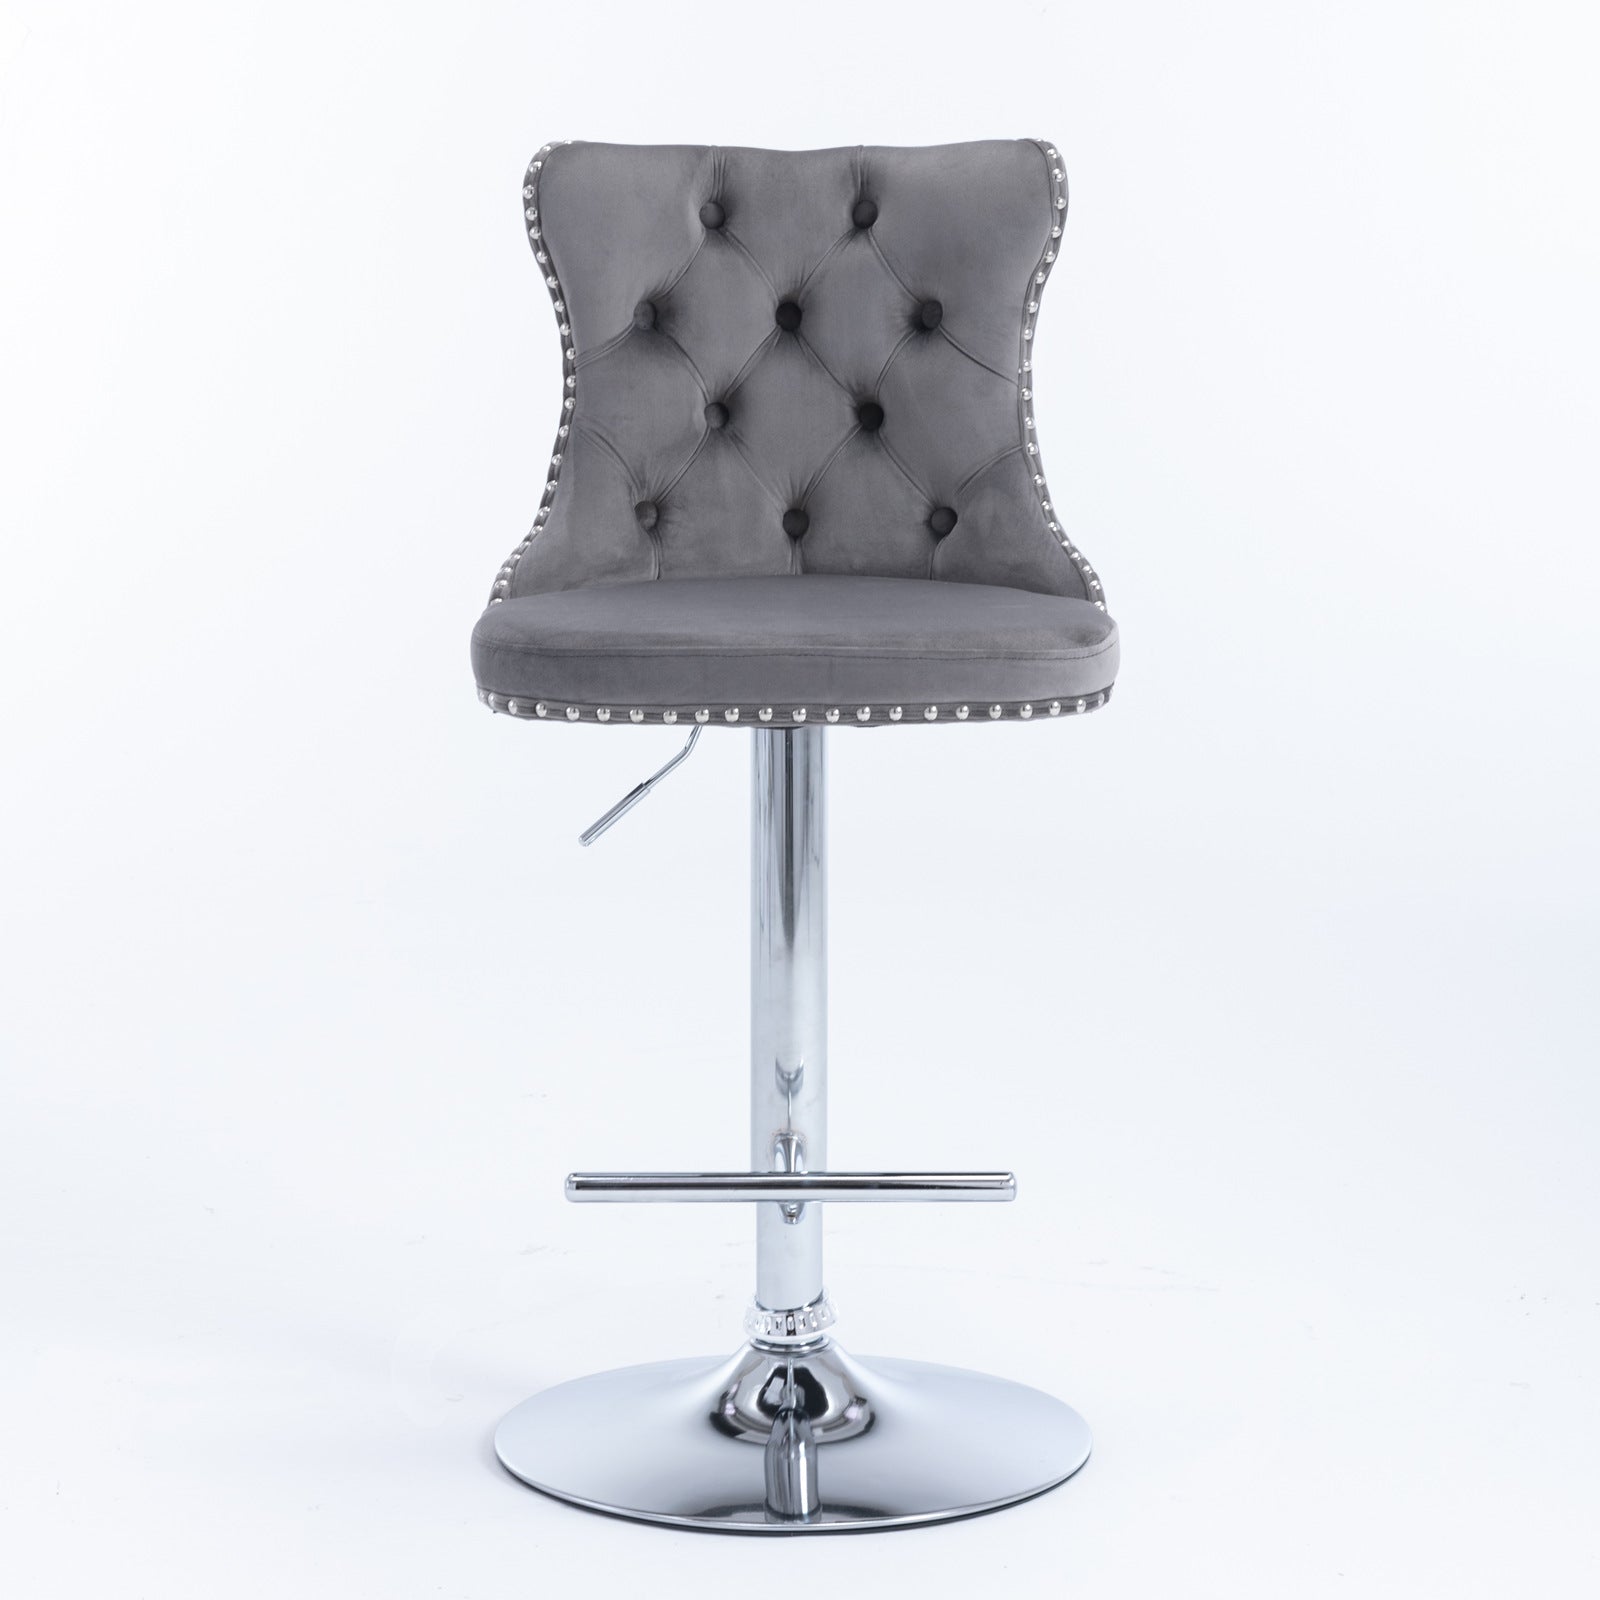 ZNTS A&A Furniture,Swivel Velvet Barstools Adjusatble Seat Height from 25-33 Inch, Modern Upholstered W114351407